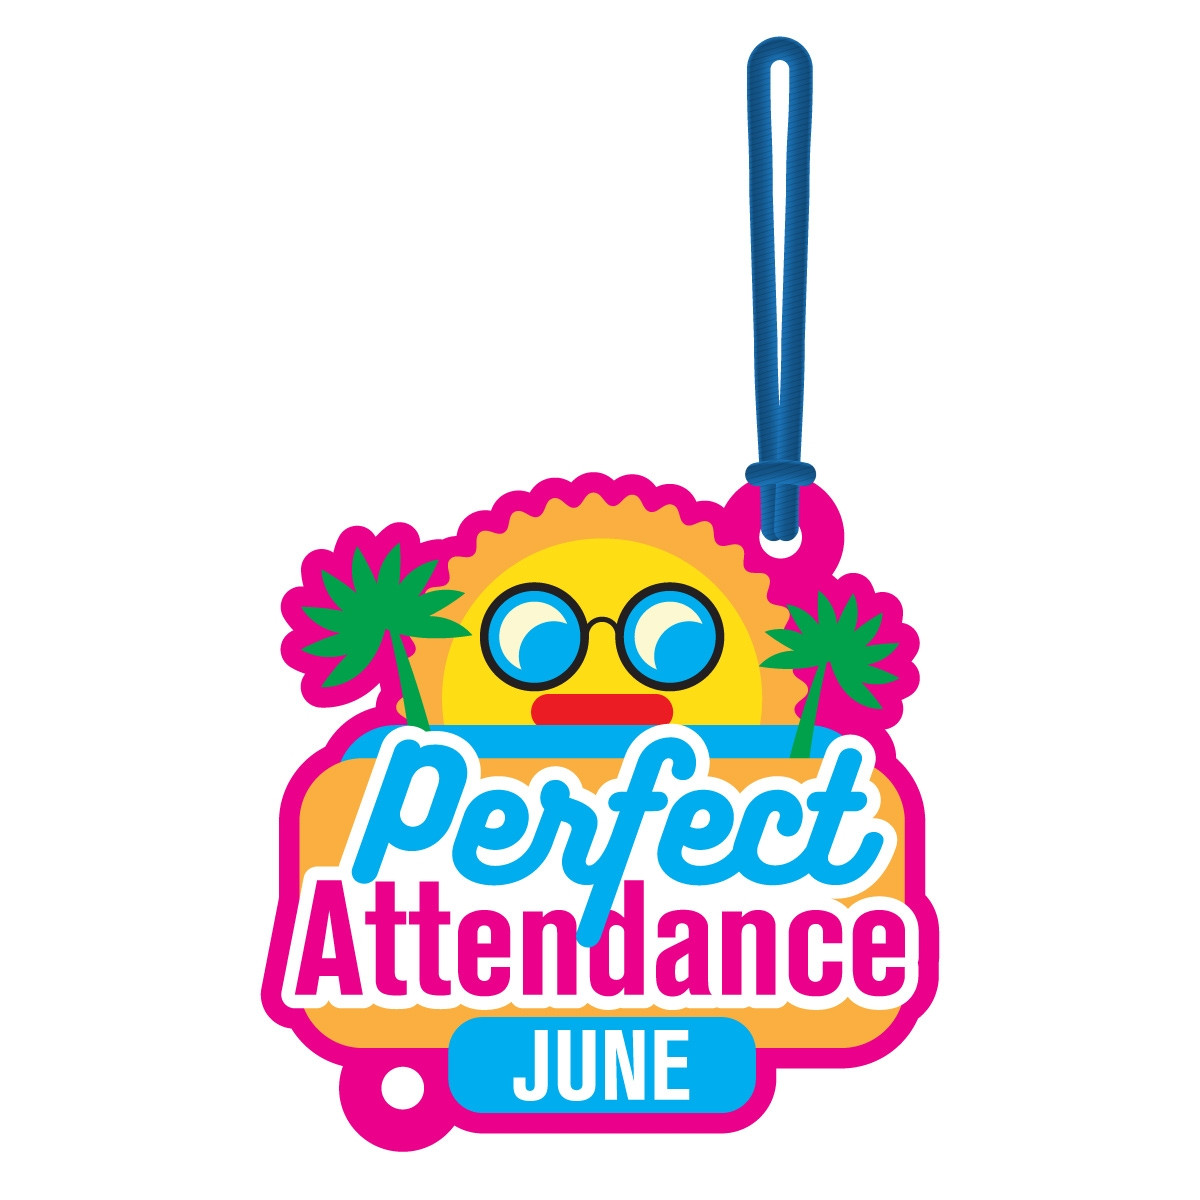 PATCH Tag - June Attendance